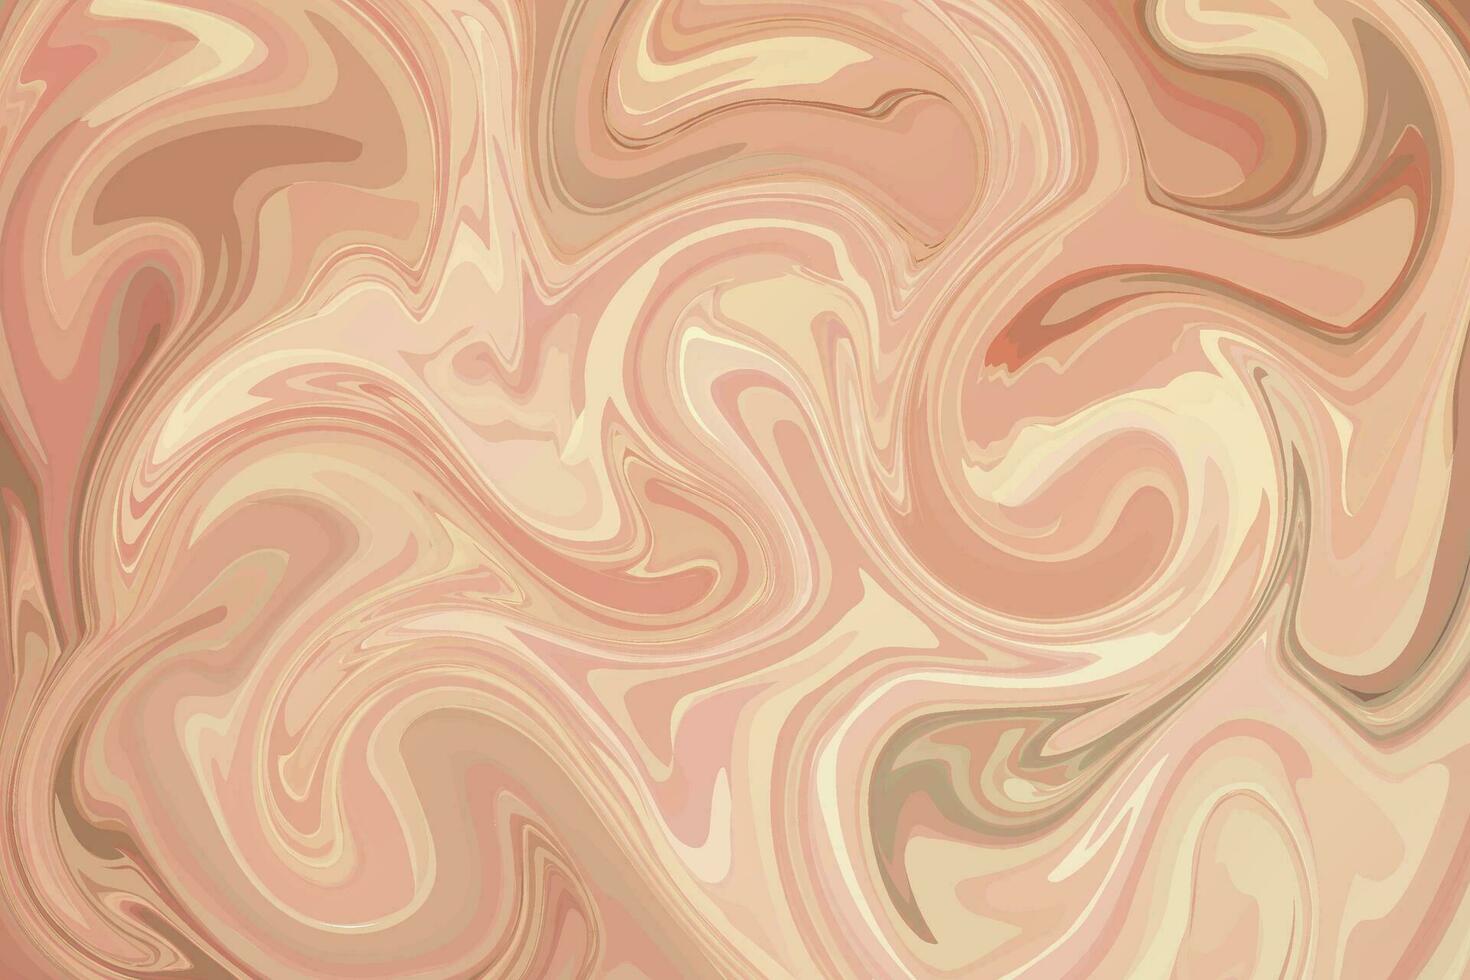 Marble Texture Background. vector